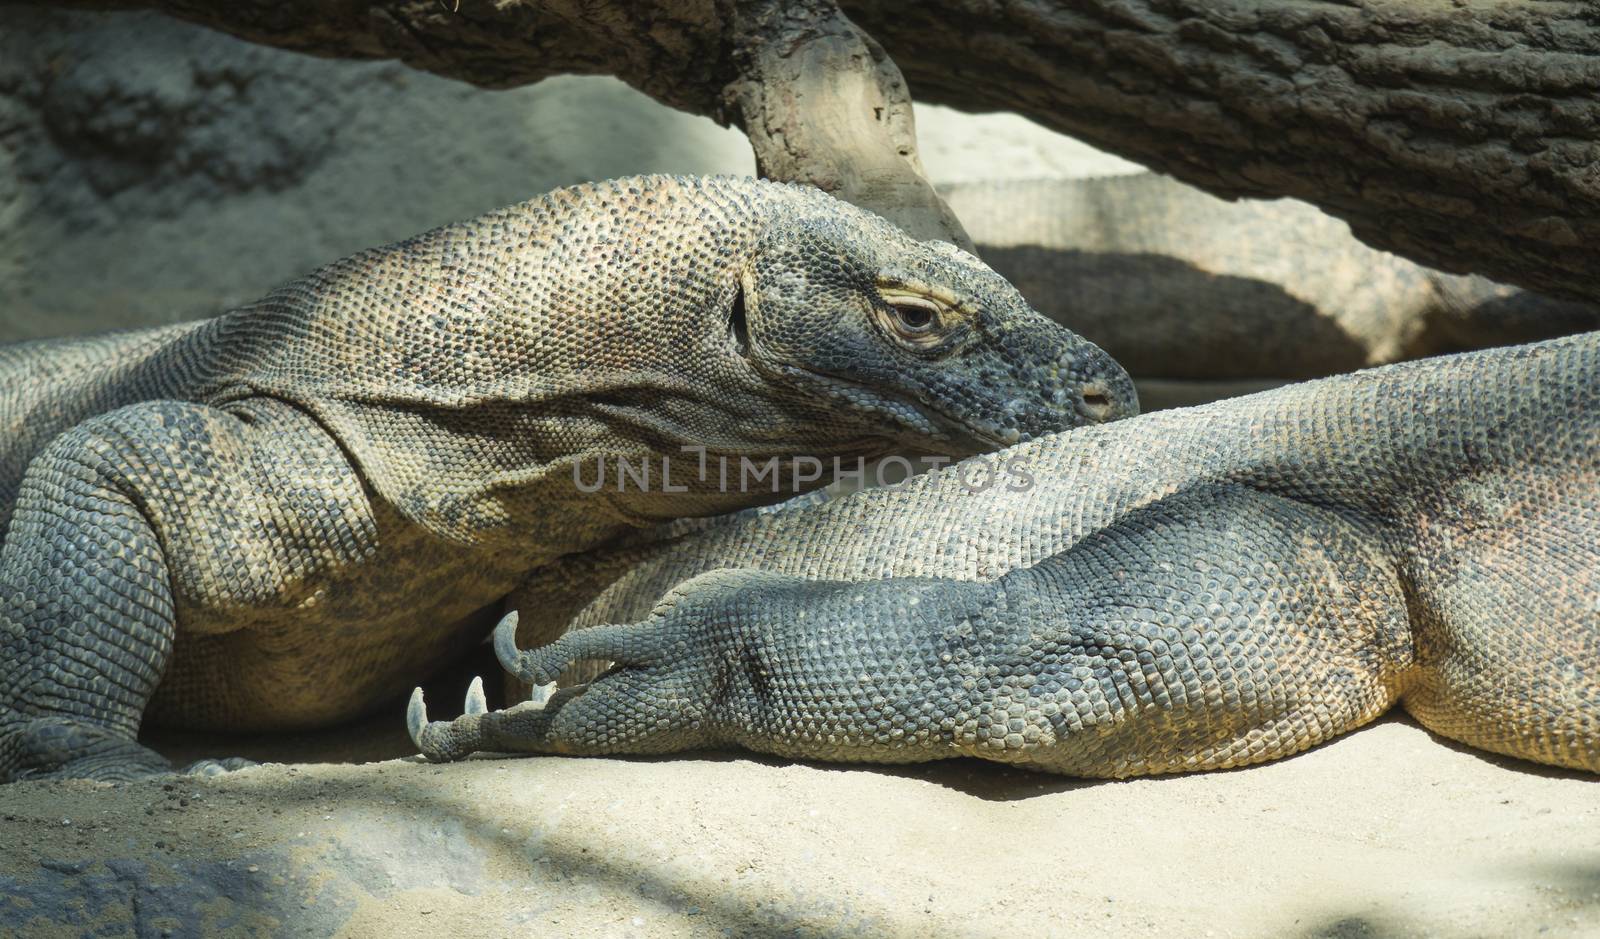 Close up portrait of Komodo Dragon lying anf resting. Varanus komodoensis also known as the Komodo monitor, is a large species of lizard found in the Indonesian islands of Komodo, selective focus, copy space